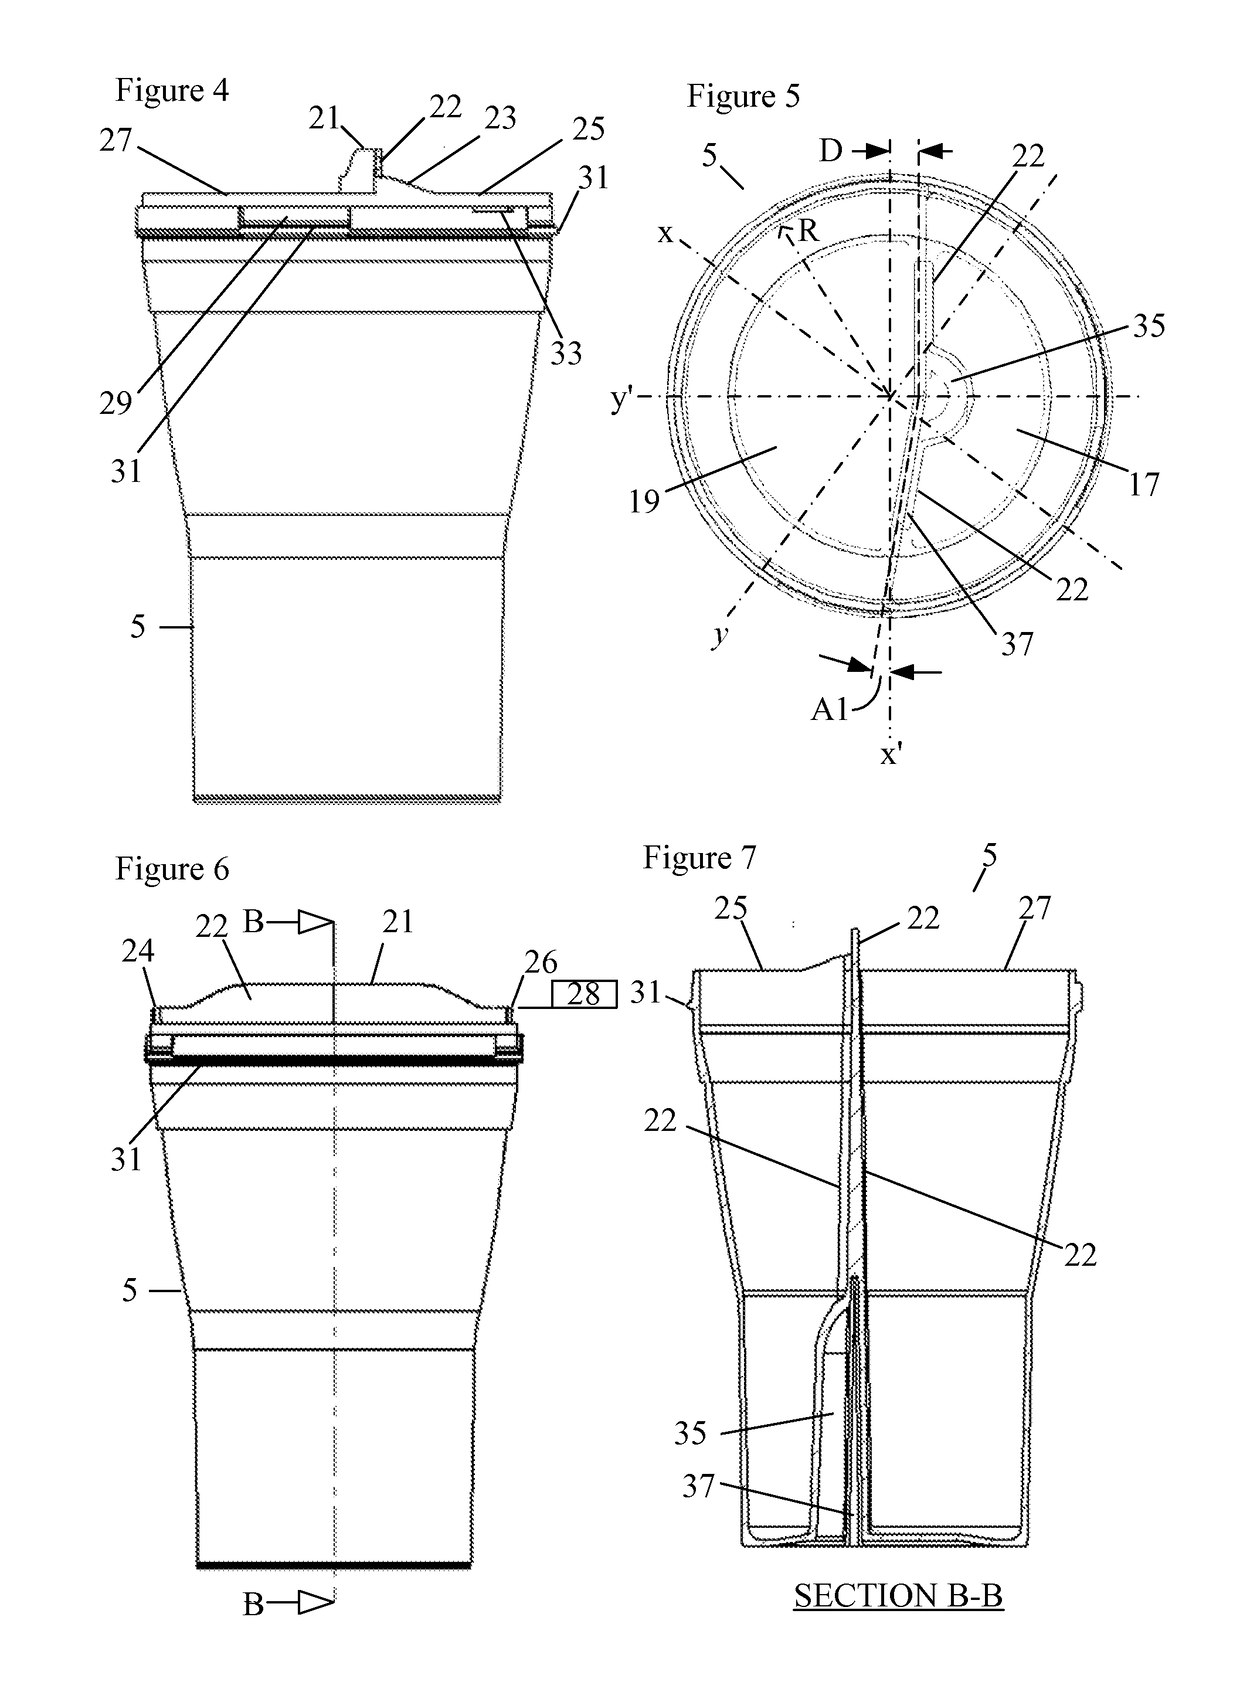 Multi-compartment snack storage and dispensing appliance